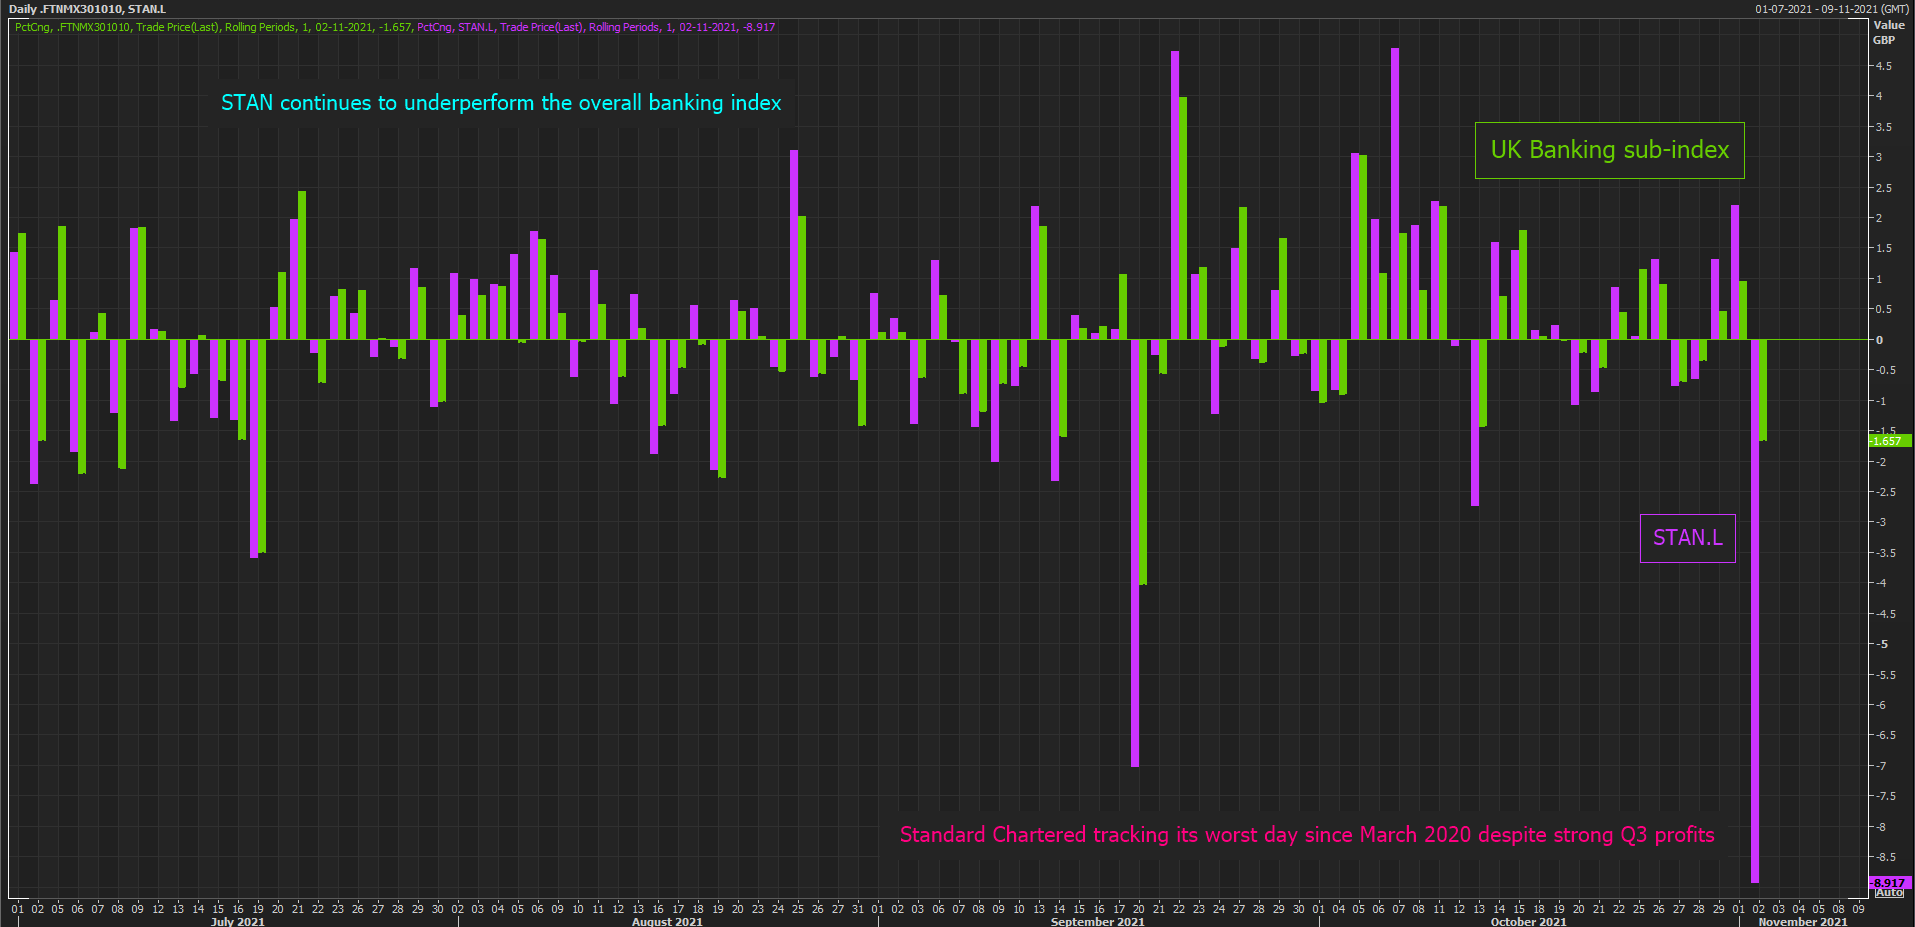 STAN tracking its worst day since March 2020 despite strong Q3 profits